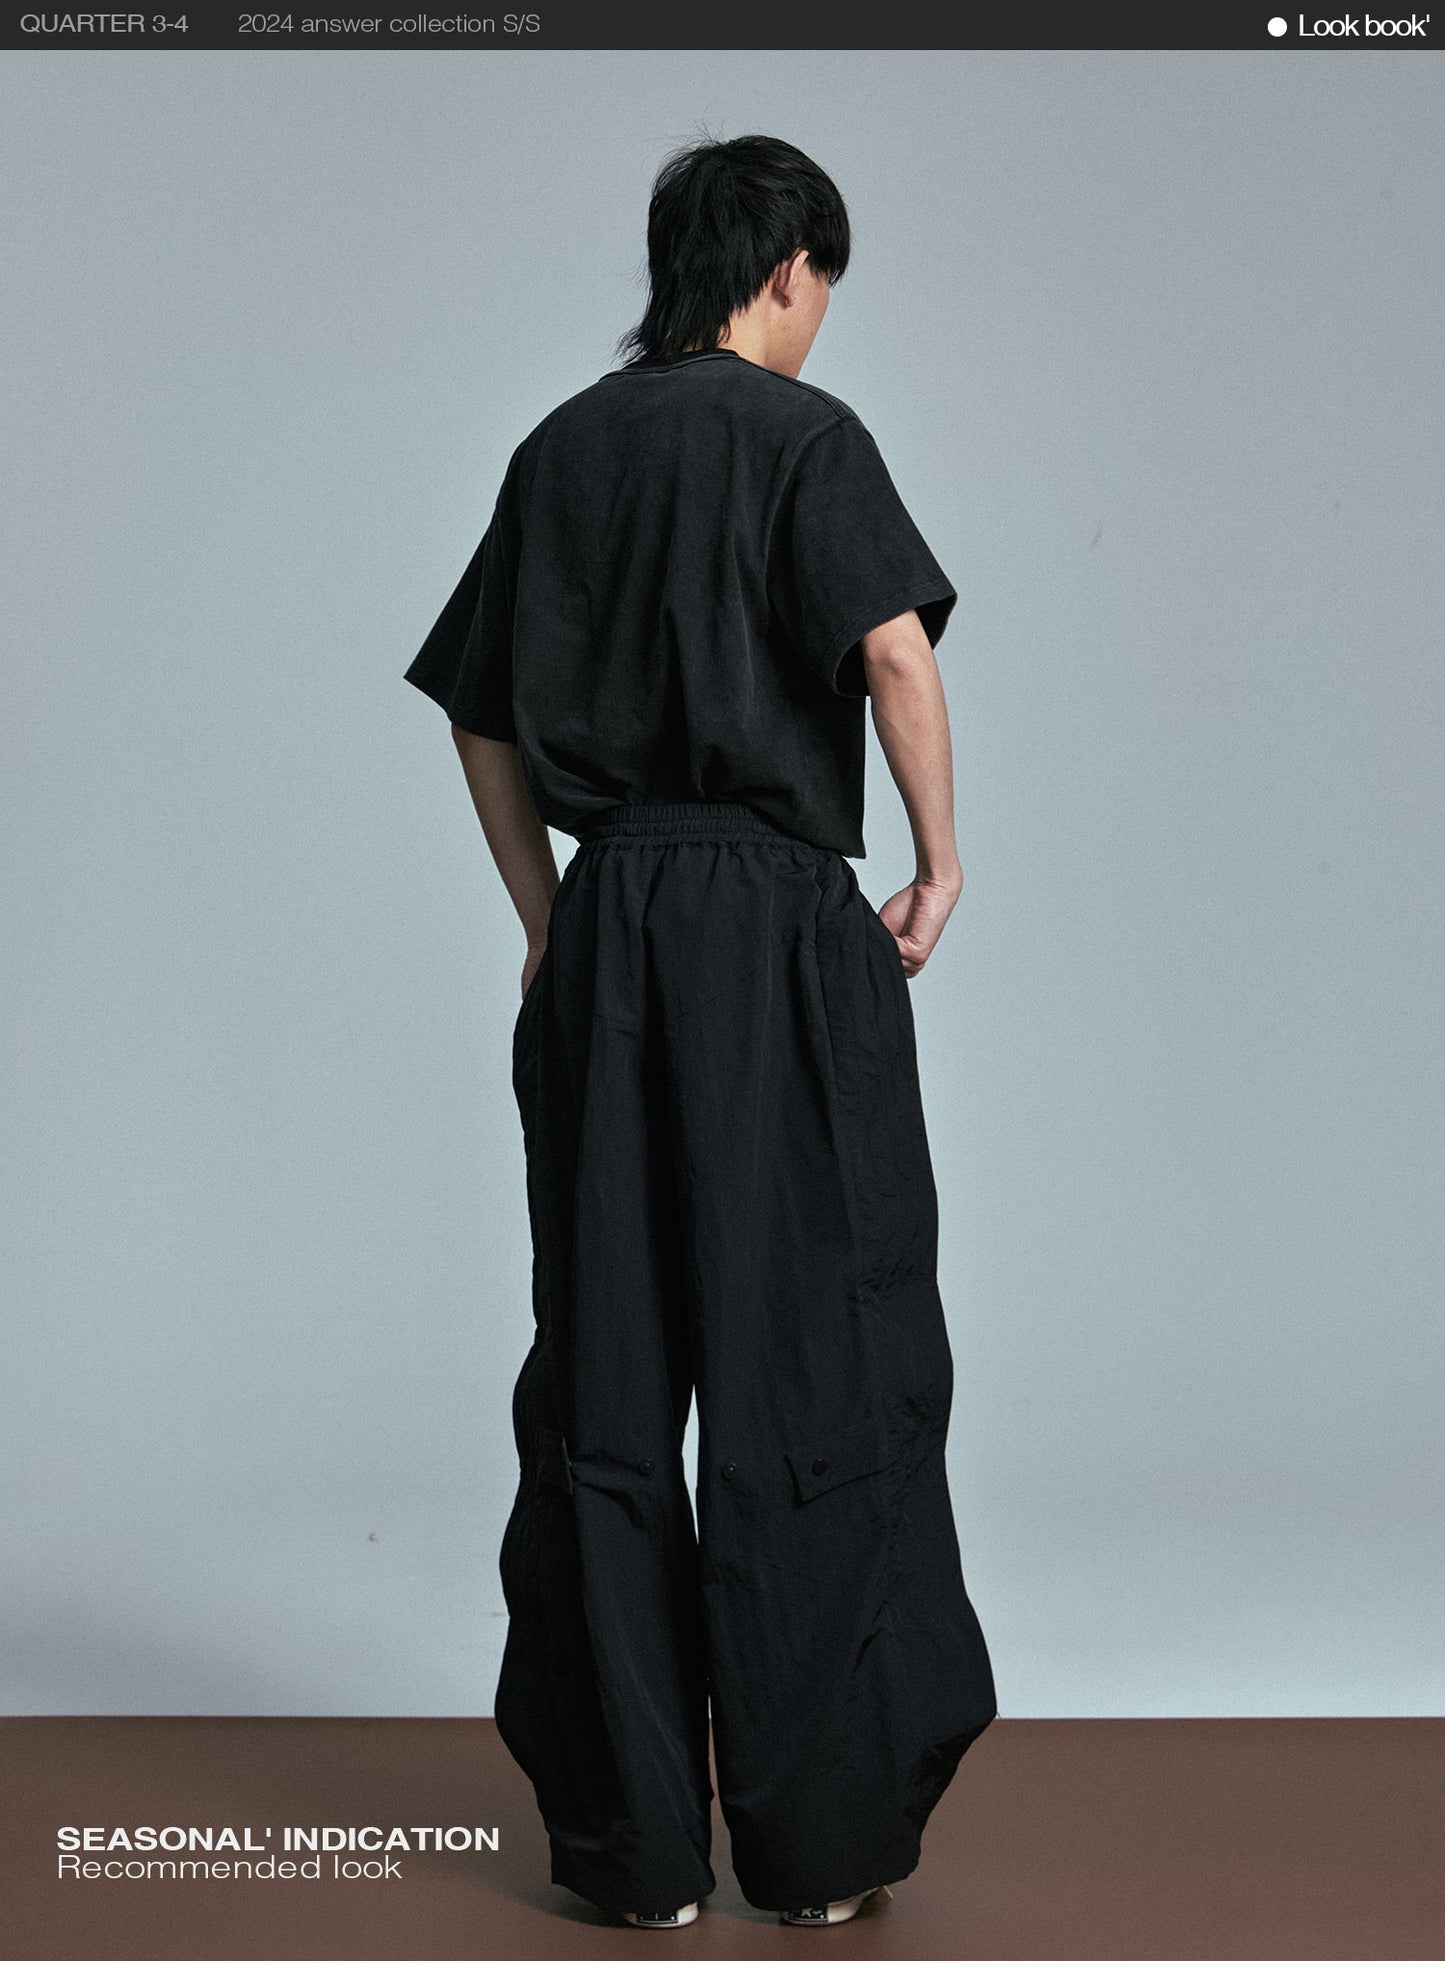 Loose Fit Nylon casual pants